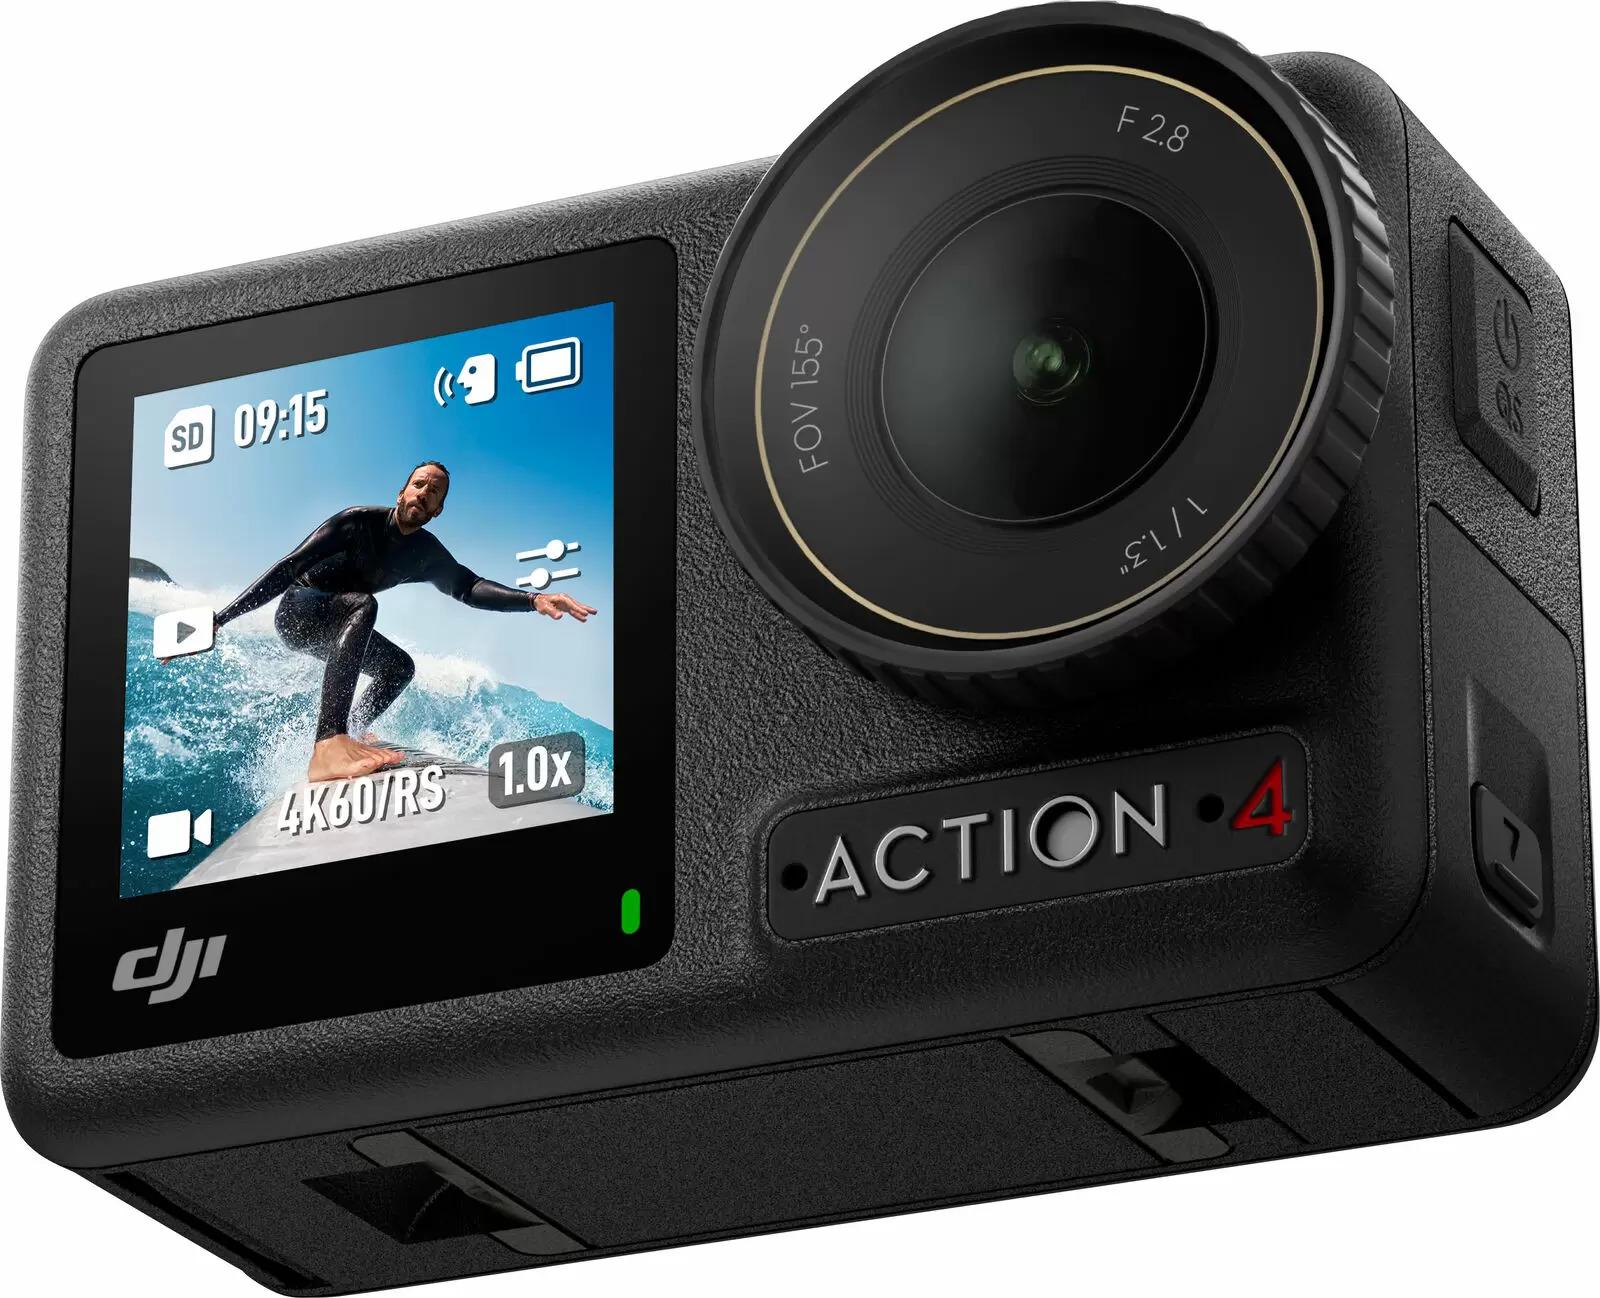 DJI Osmo Action 4 4K Action Camera Standard Bundle for $299.99 Shipped